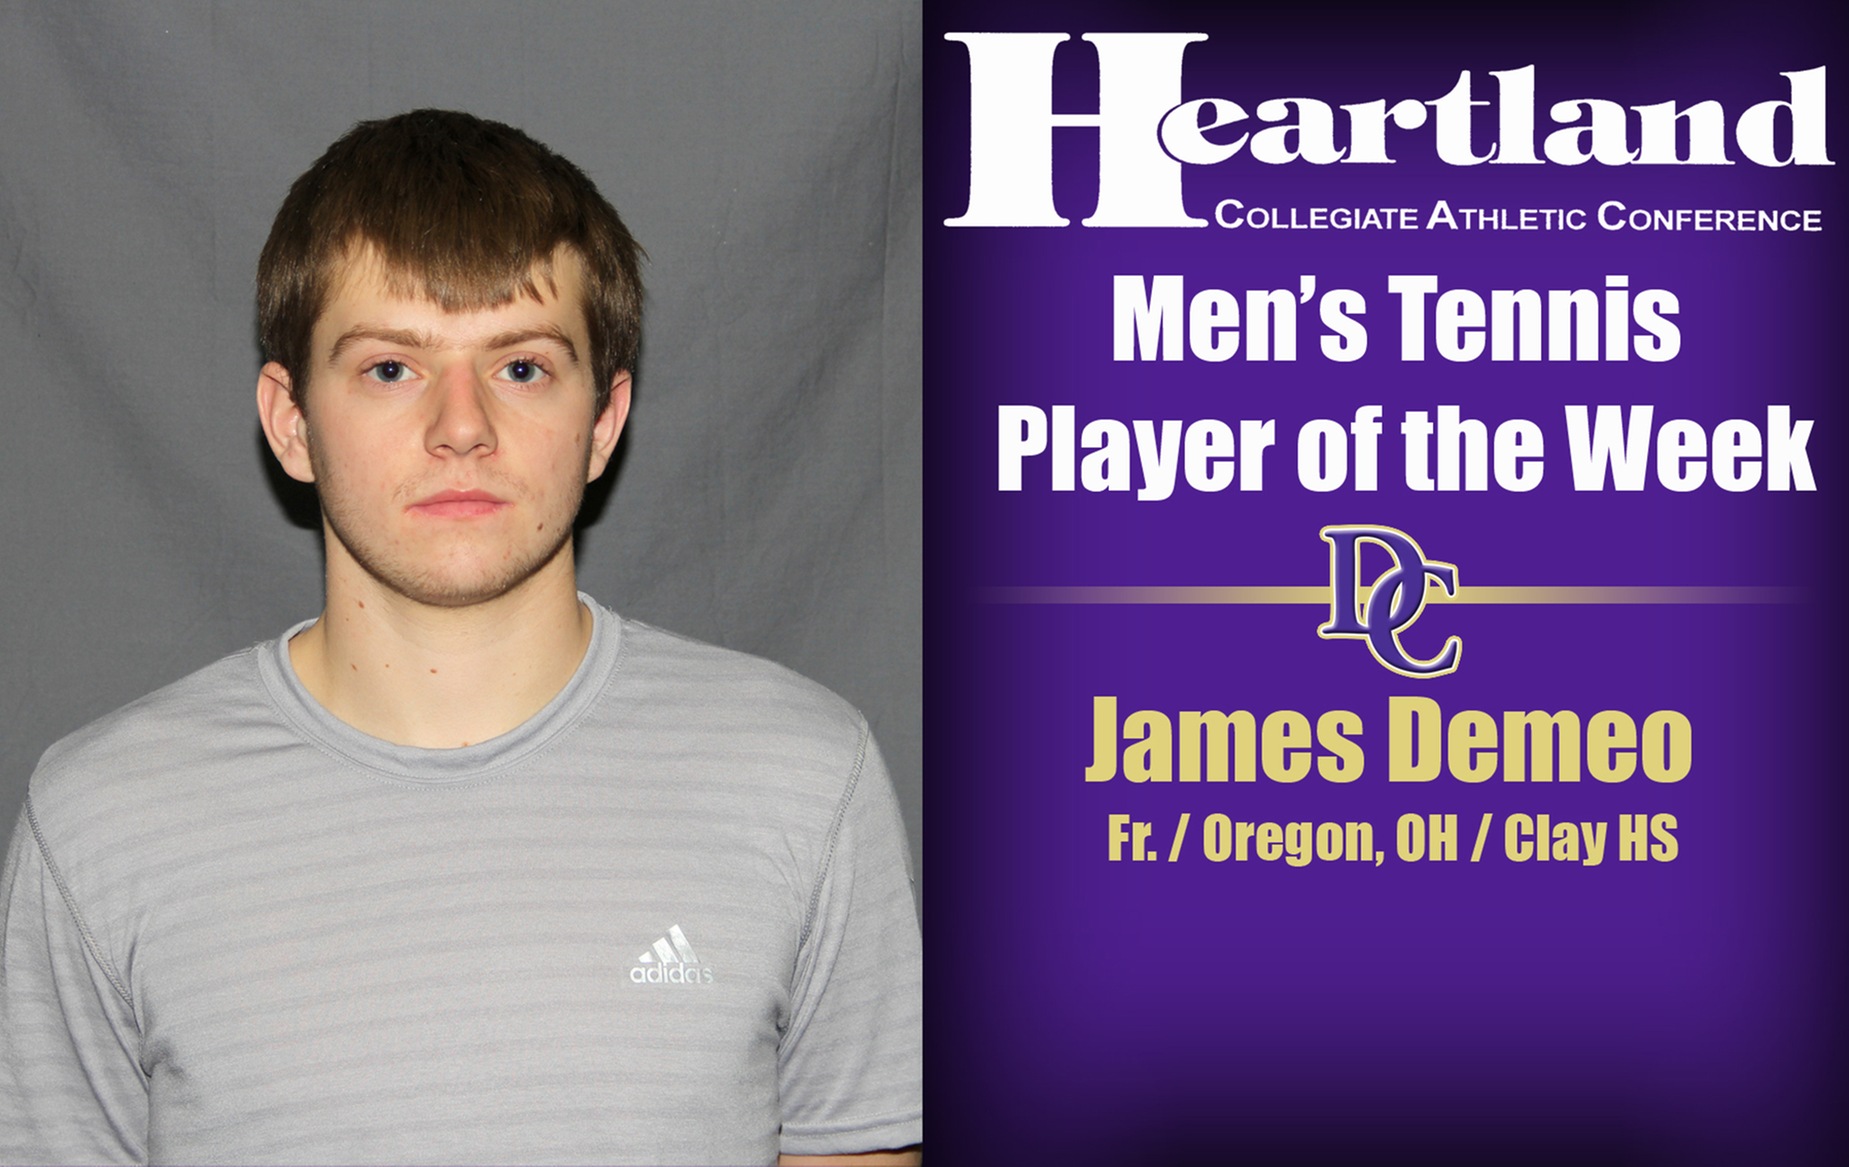 DC’s Demeo records HCAC Player of the Week